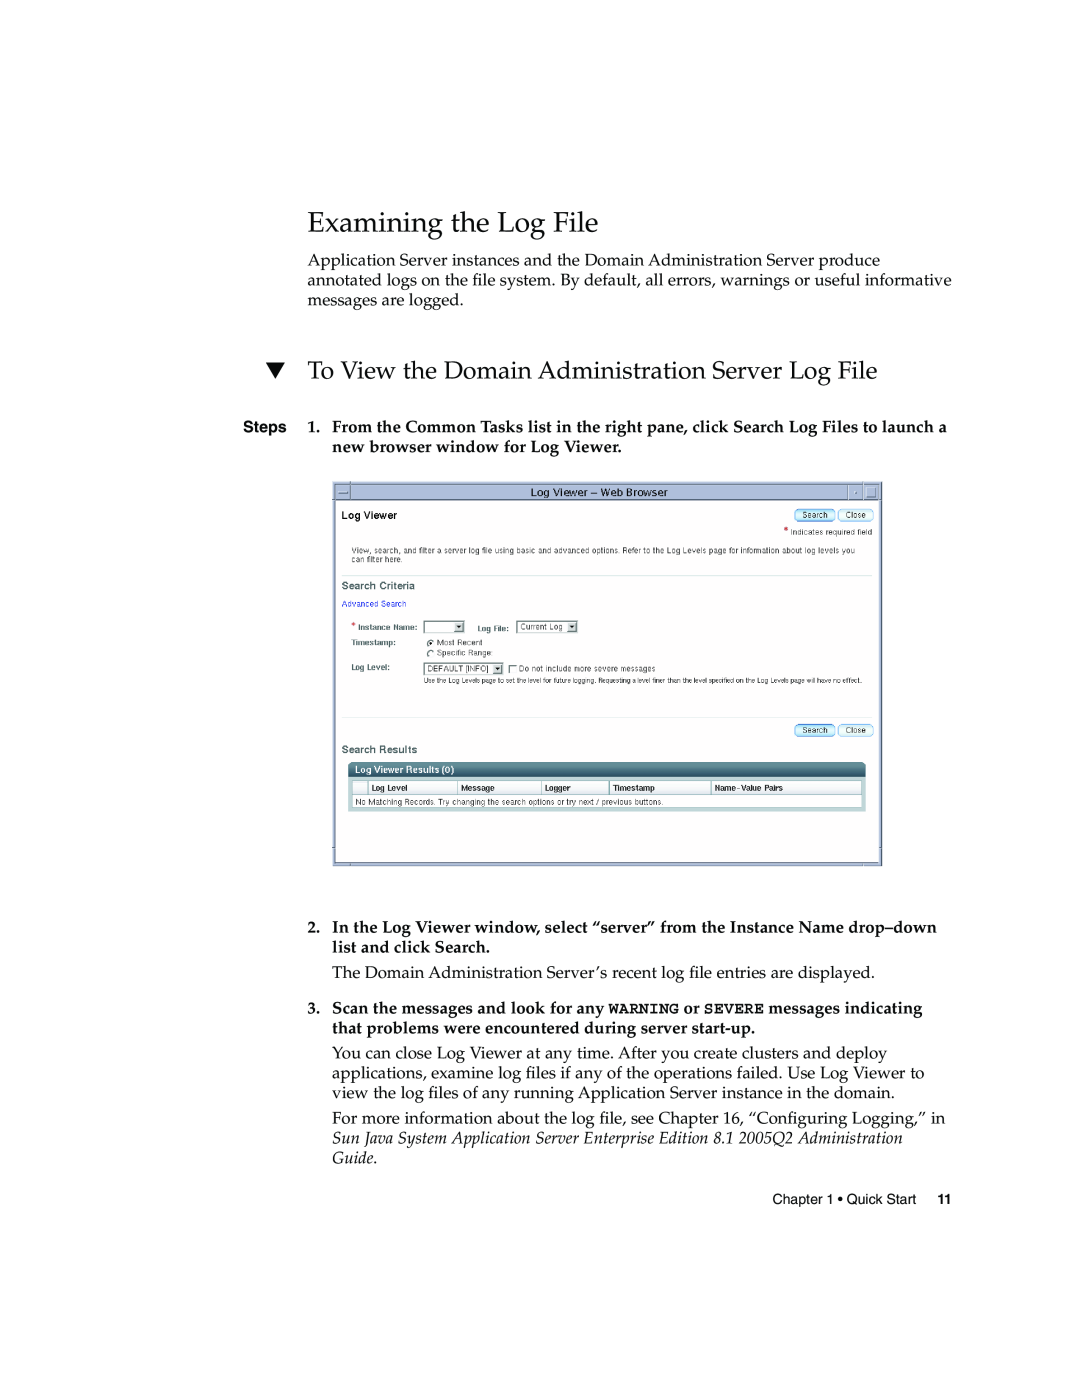 Sun Microsystems 2005Q2 quick start Examining the Log File, To View the Domain Administration Server Log File 